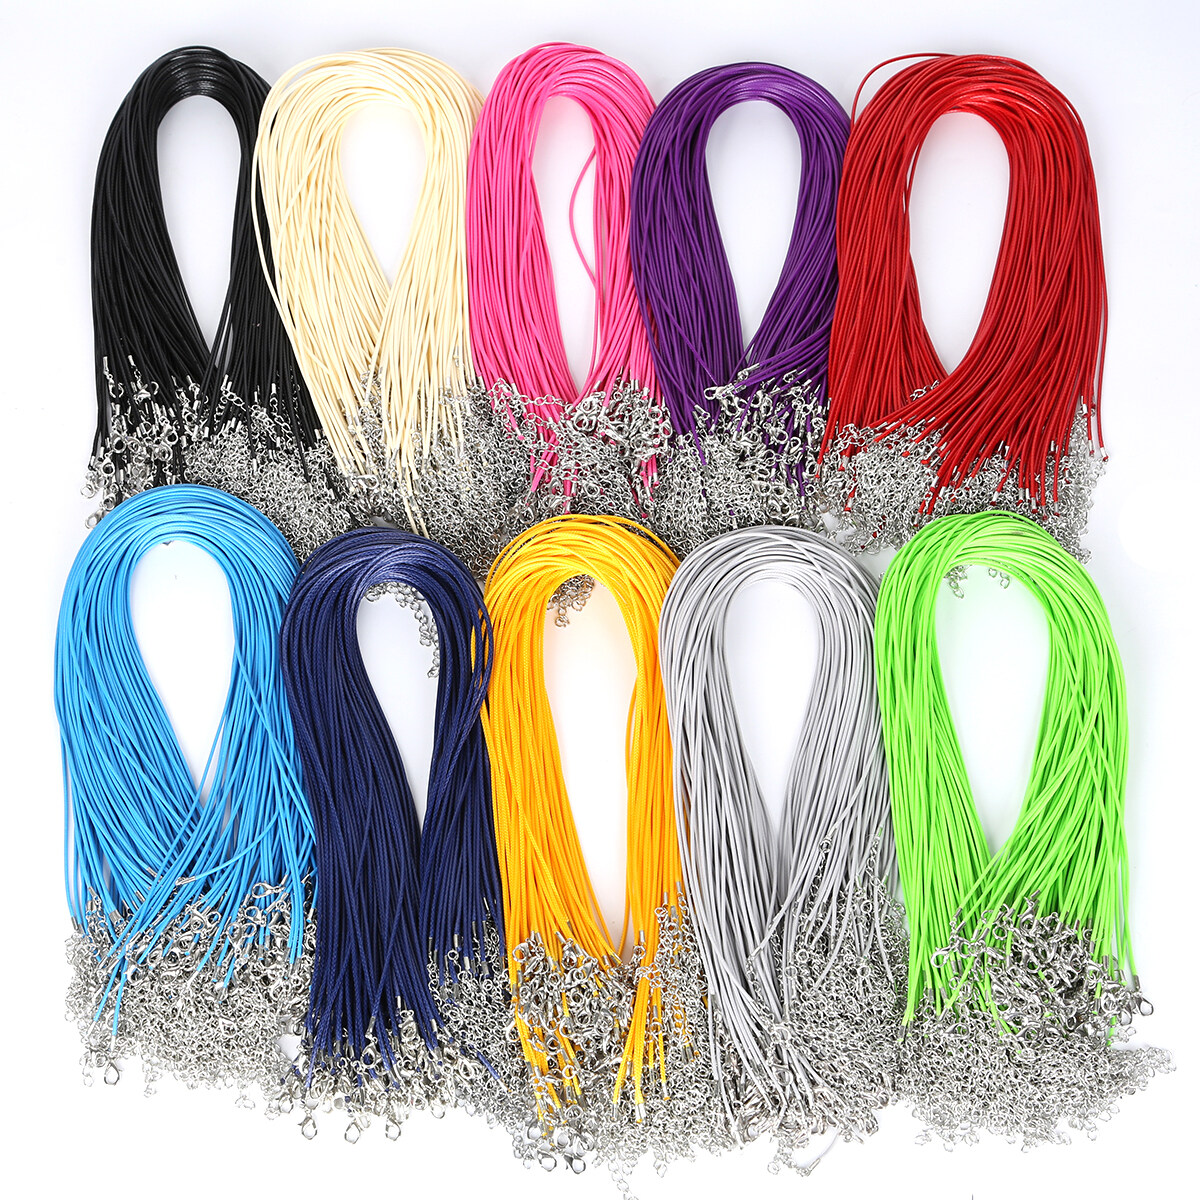 50pcs Bracelet Making Cord, Lystaii Multi Color Leather Plaited Bracelet  Cords Ropes Charms with Lobster Claw Clasp for Bracelets Jewelry Making DIY